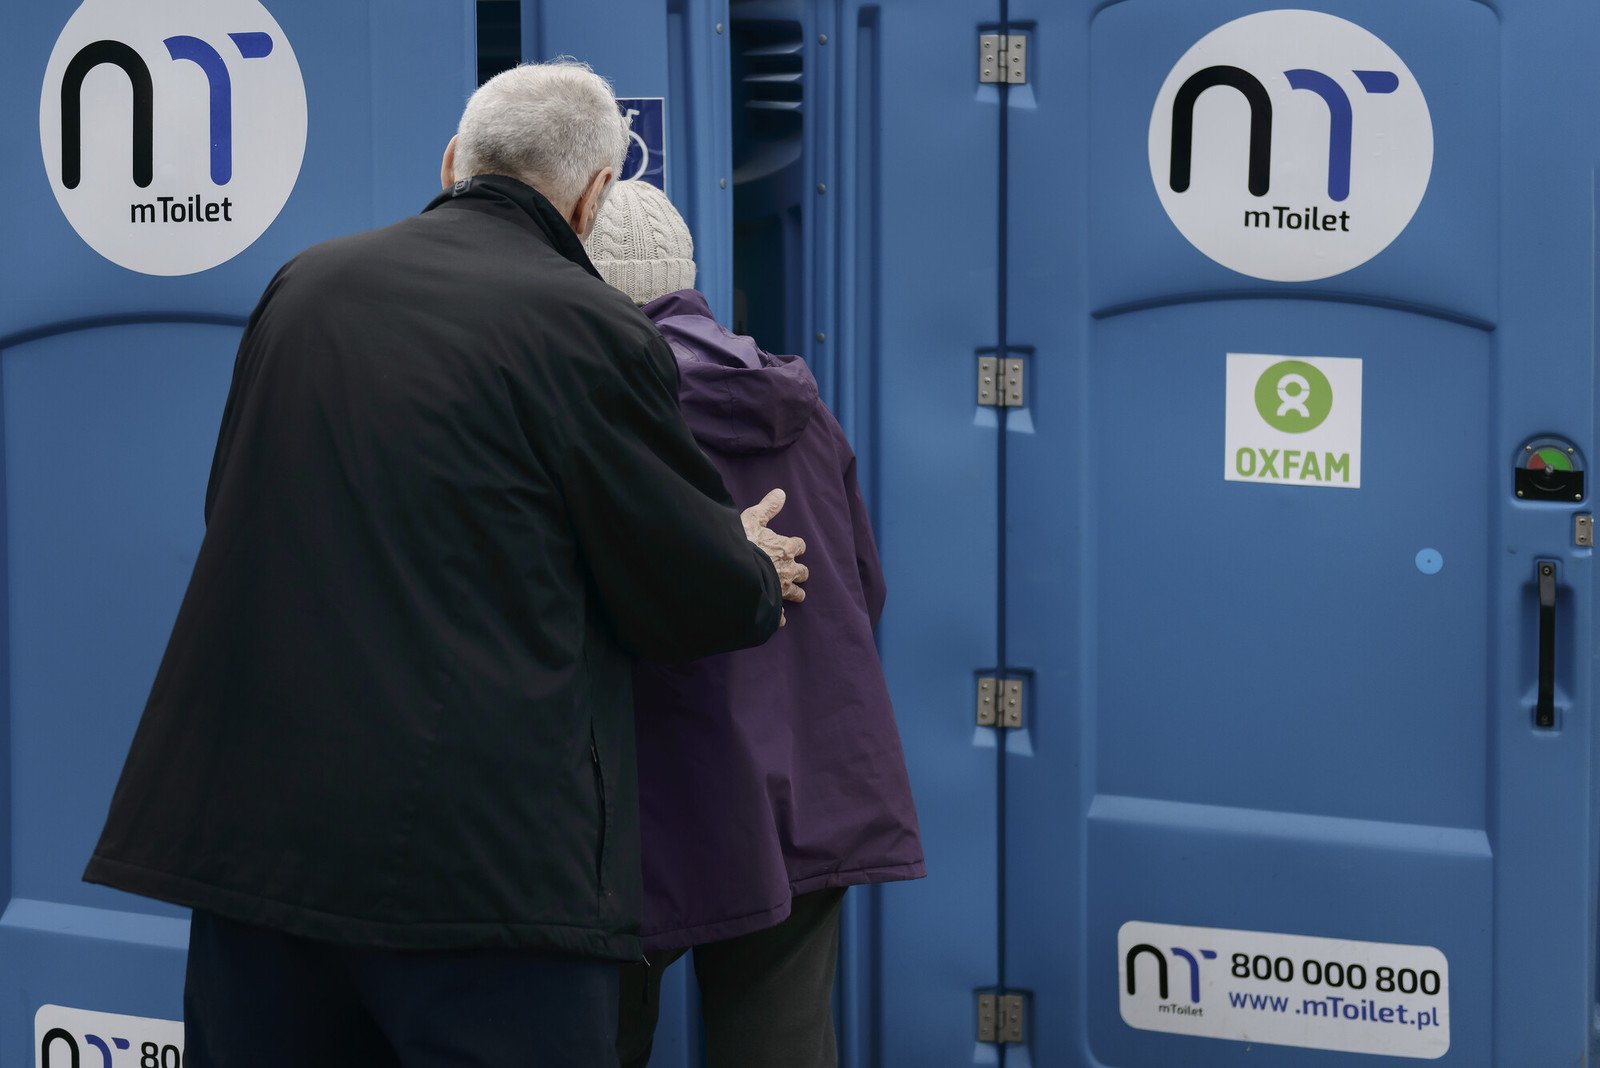 An elderly man and woman walking together towards Oxfam's portable toilets.